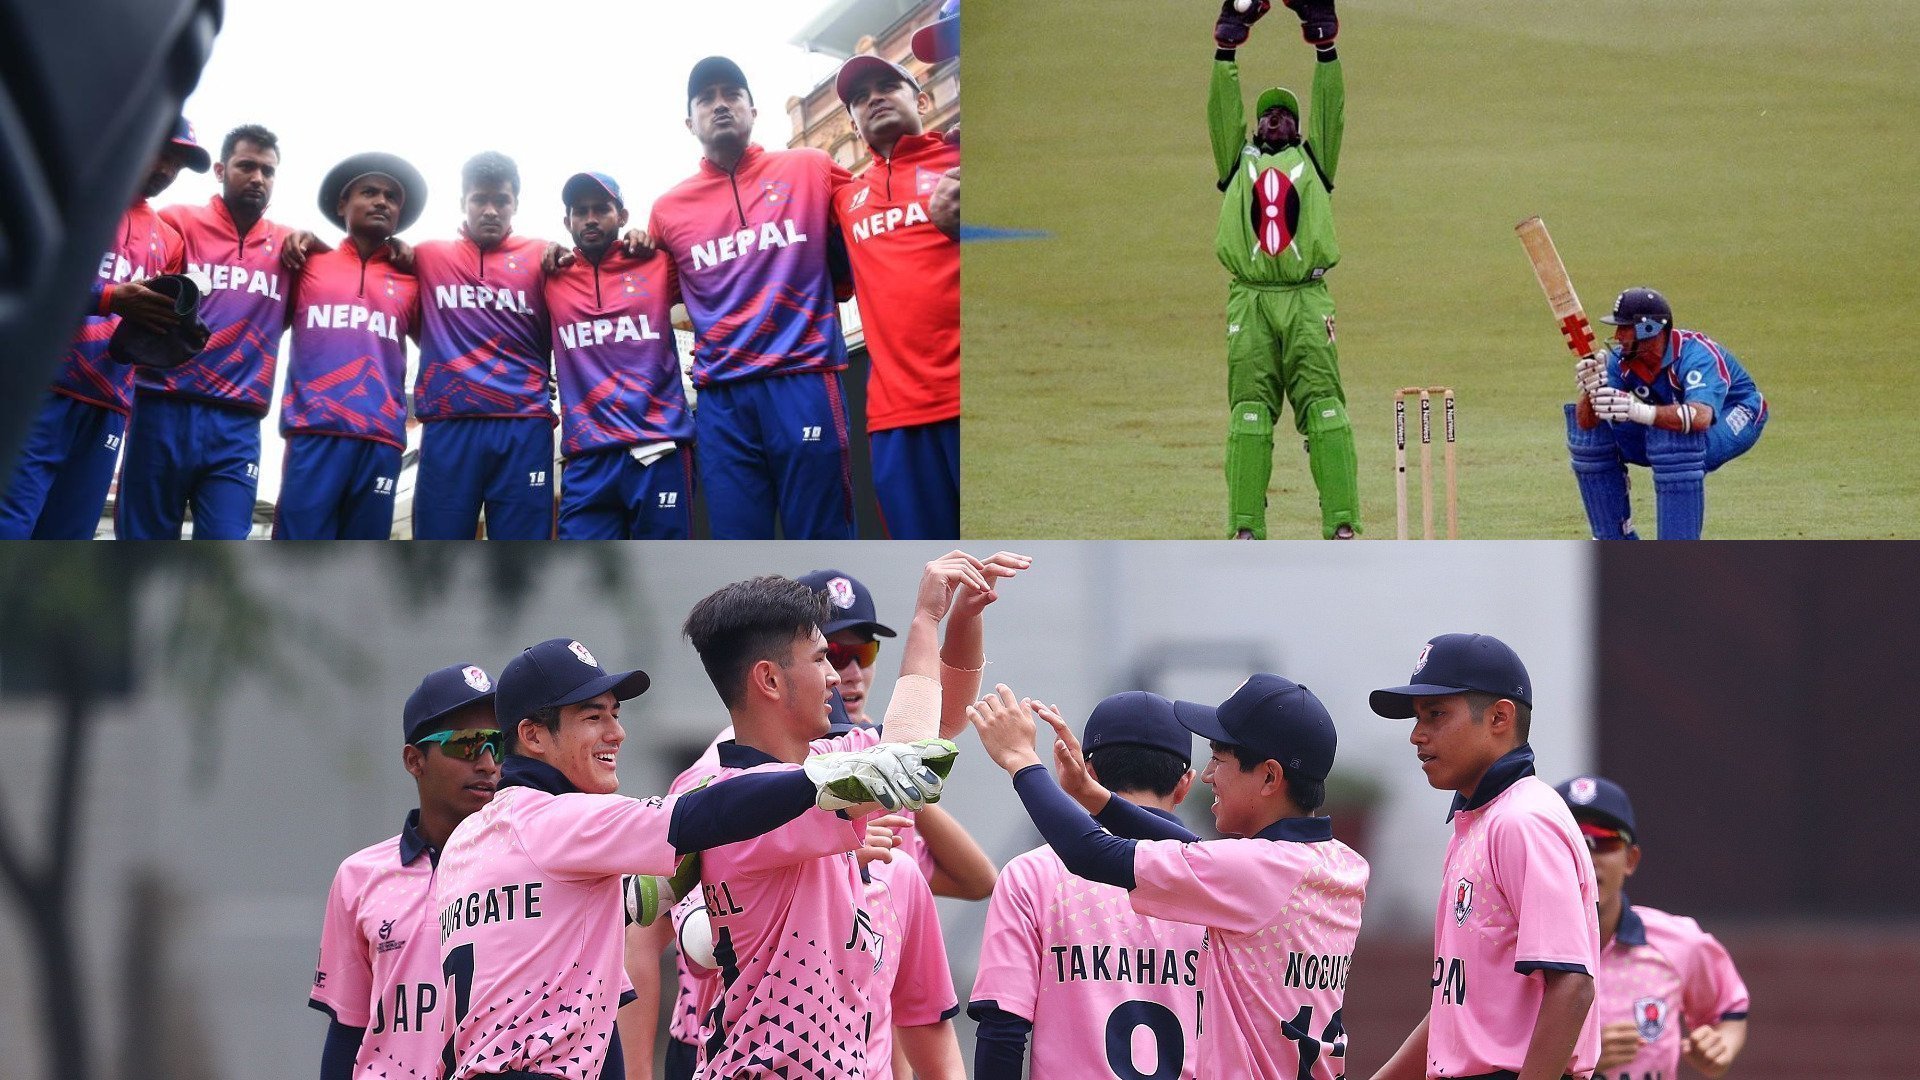 All the kits at the ICC Men's Under 19 Cricket World Cup